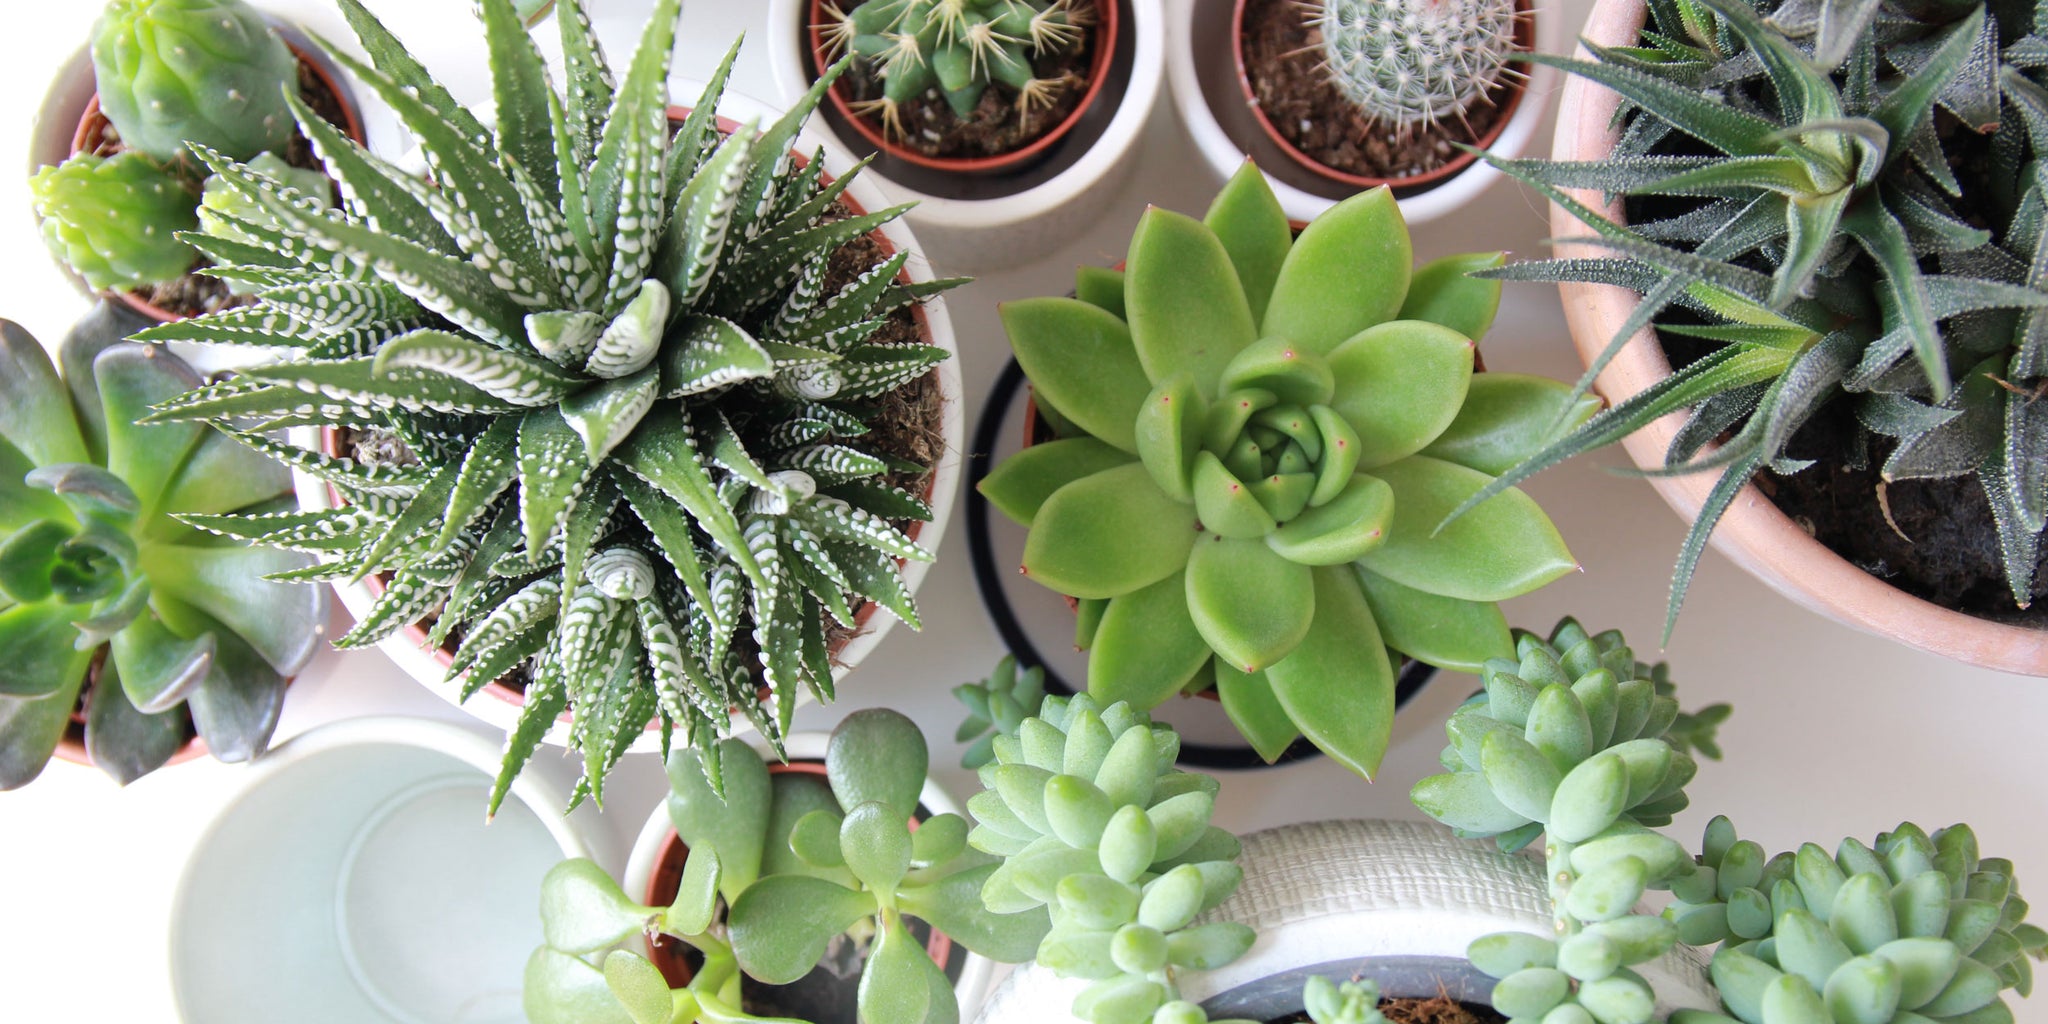 5 Galentine's Day Gift Ideas for 2021 (For Galentine's Near or Far) Plant Babies | Patio Essentials